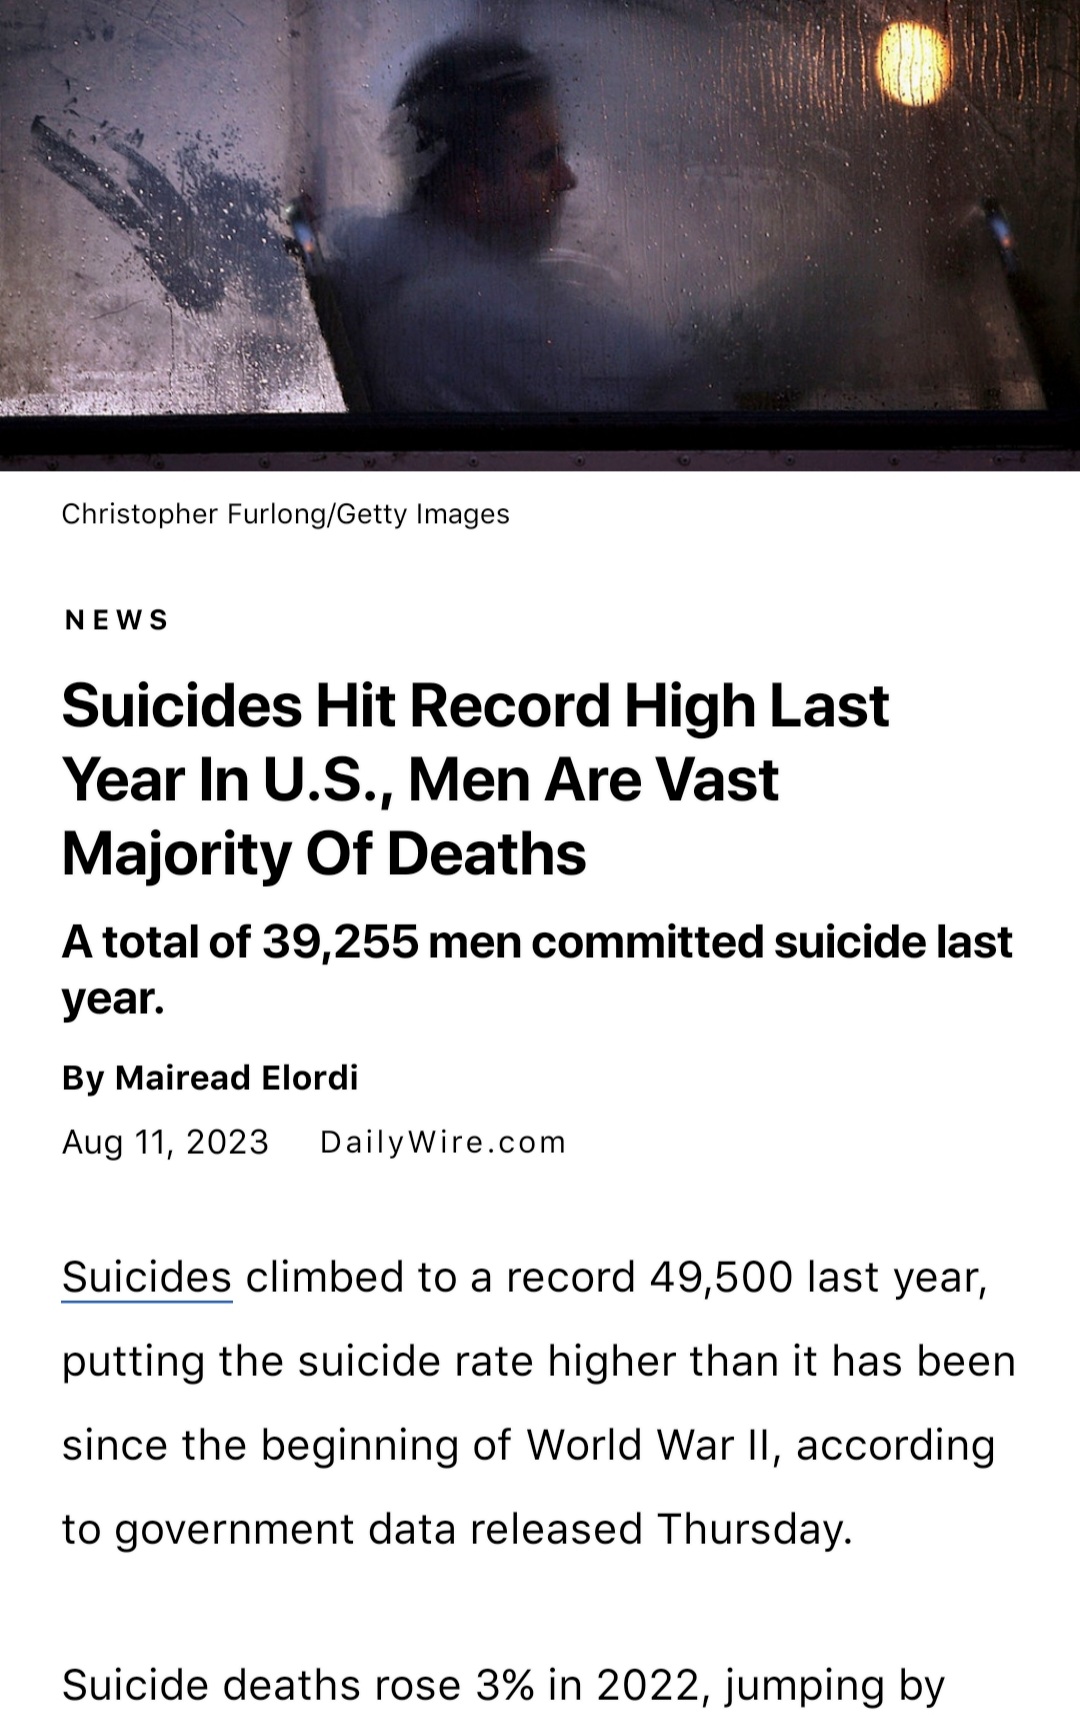 Suicides Rate Nearly 50K Per Year According to New CDC Report